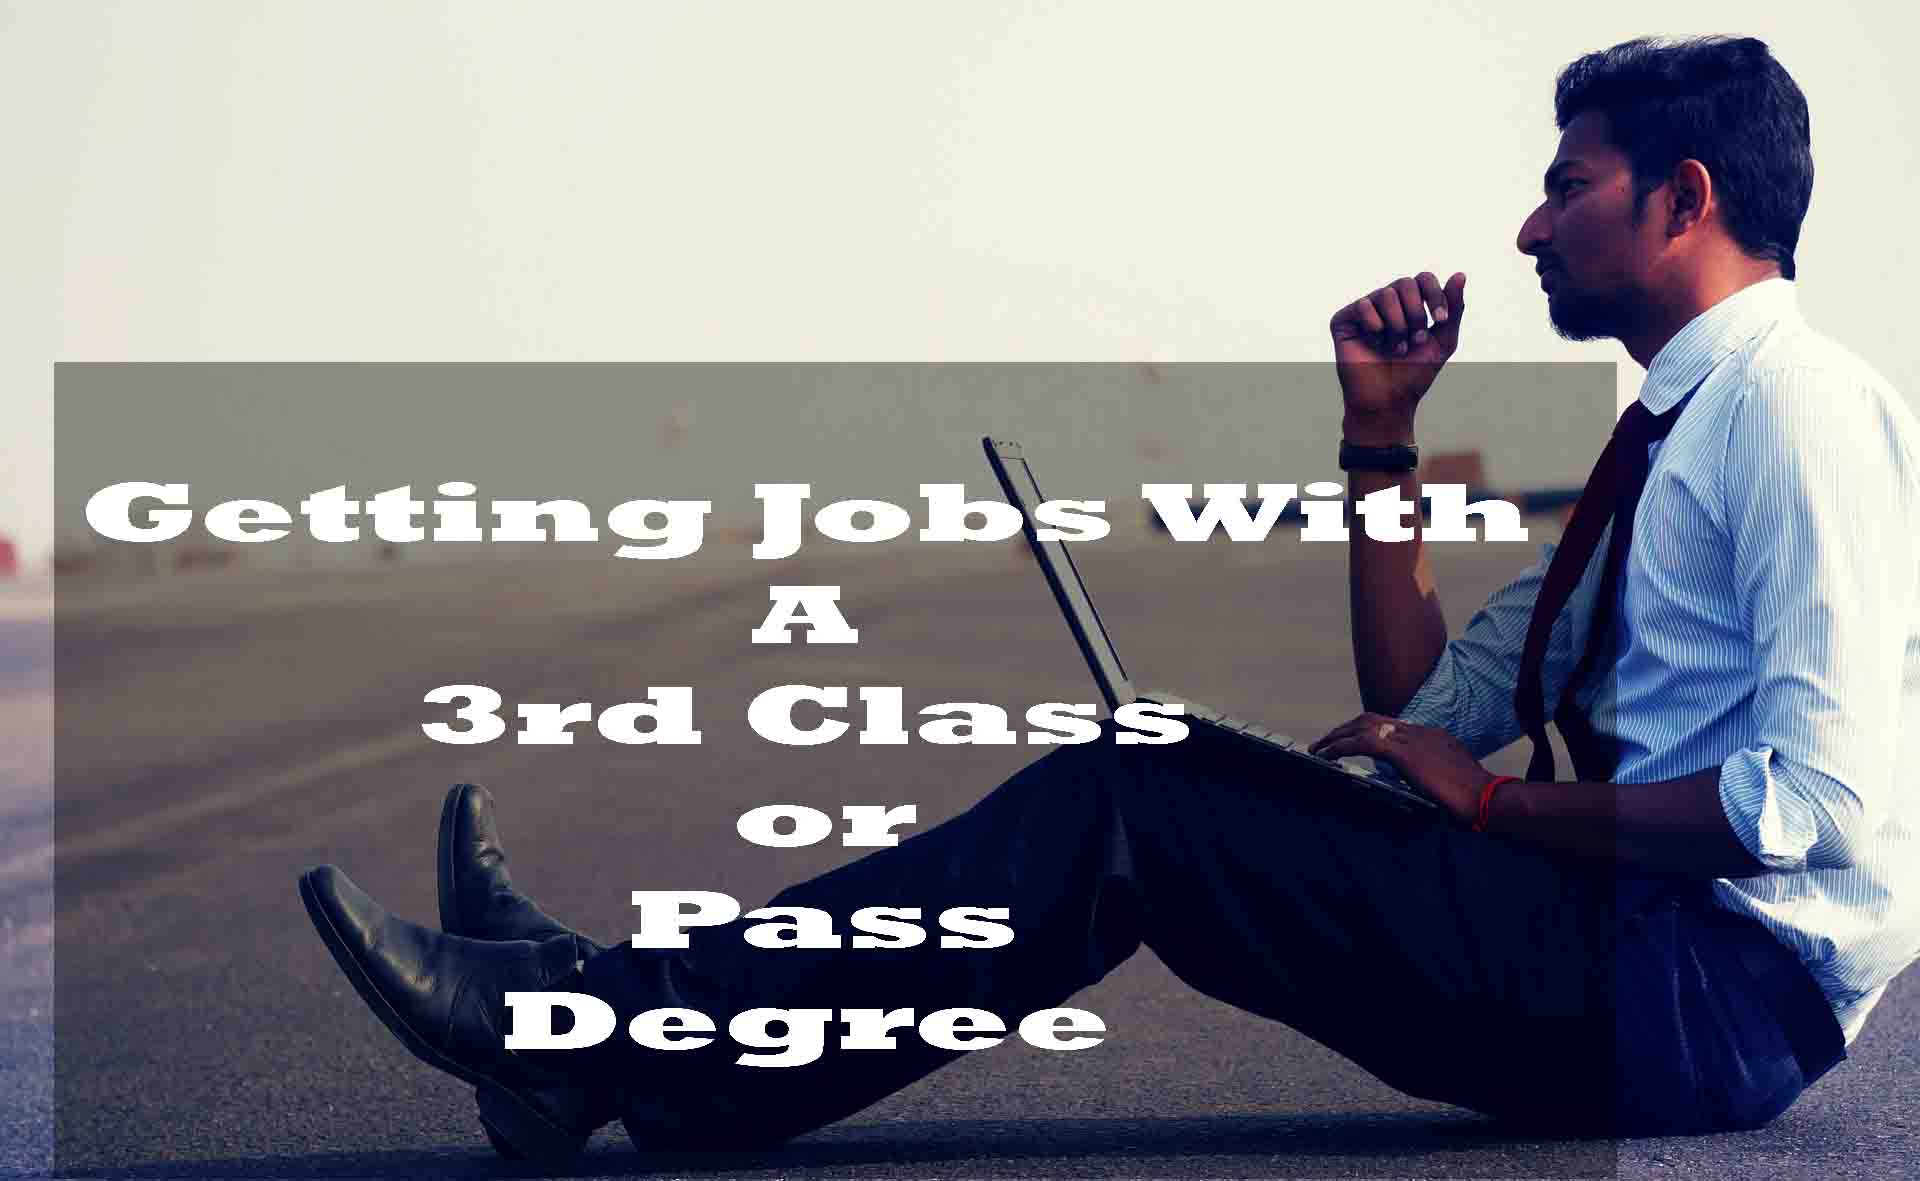 Getting jobs with a 3rd class or pass degree